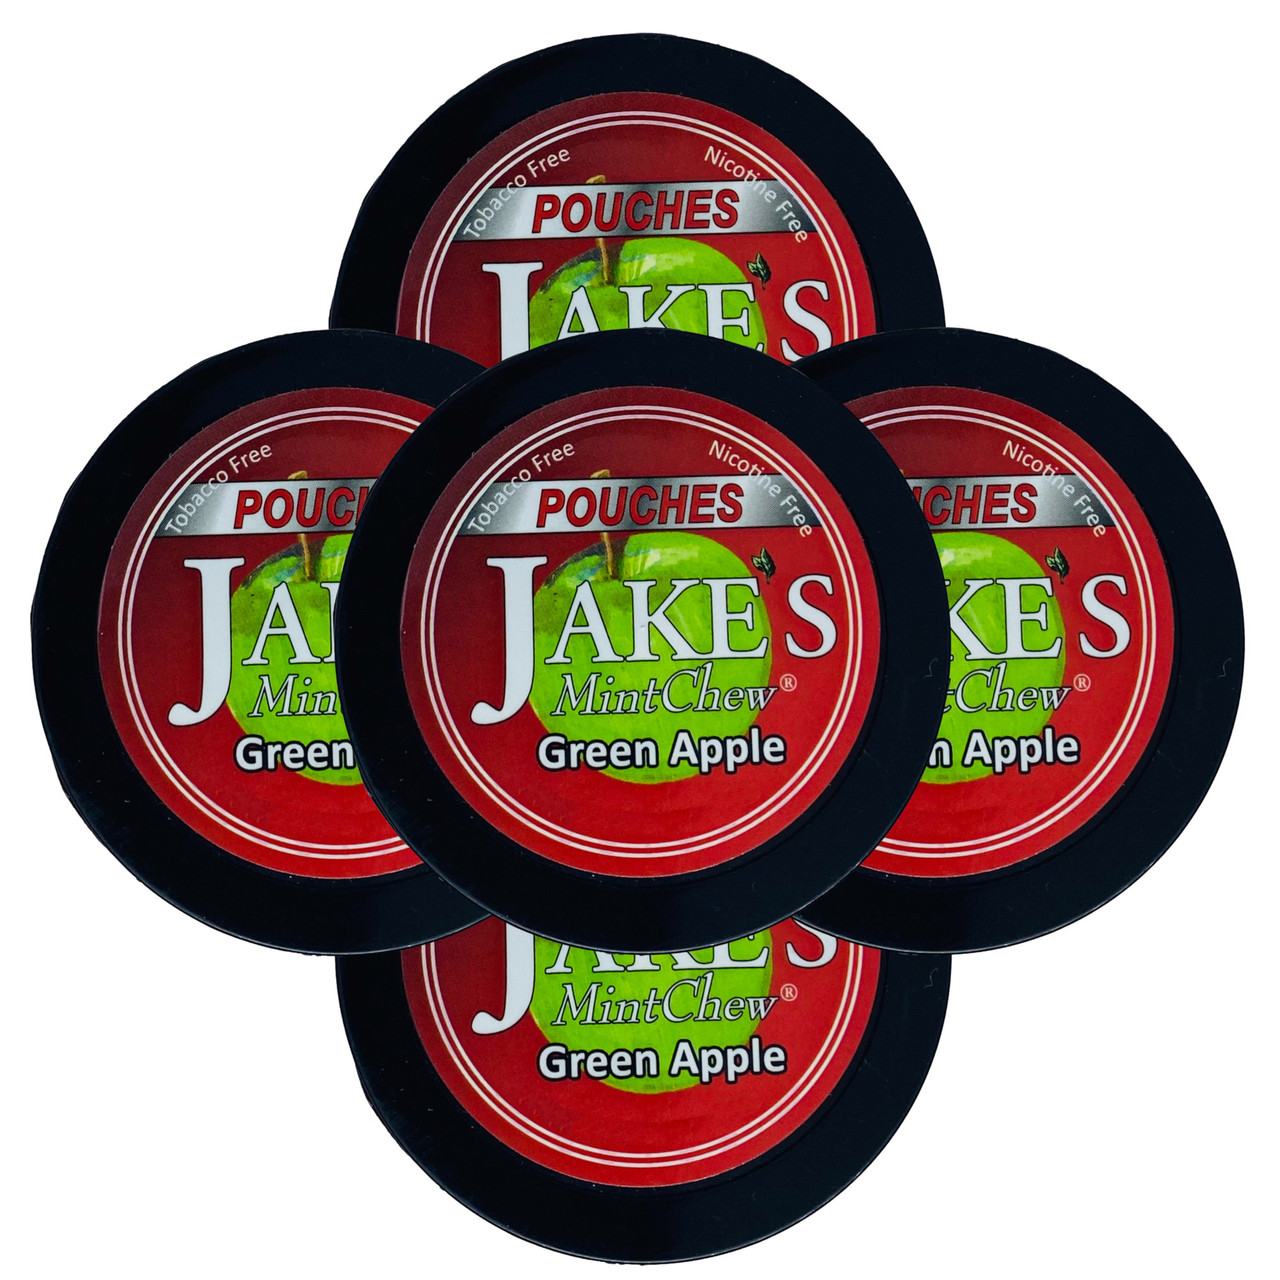 Jake's Mint Chew Pouches Green Apple 5 Cans